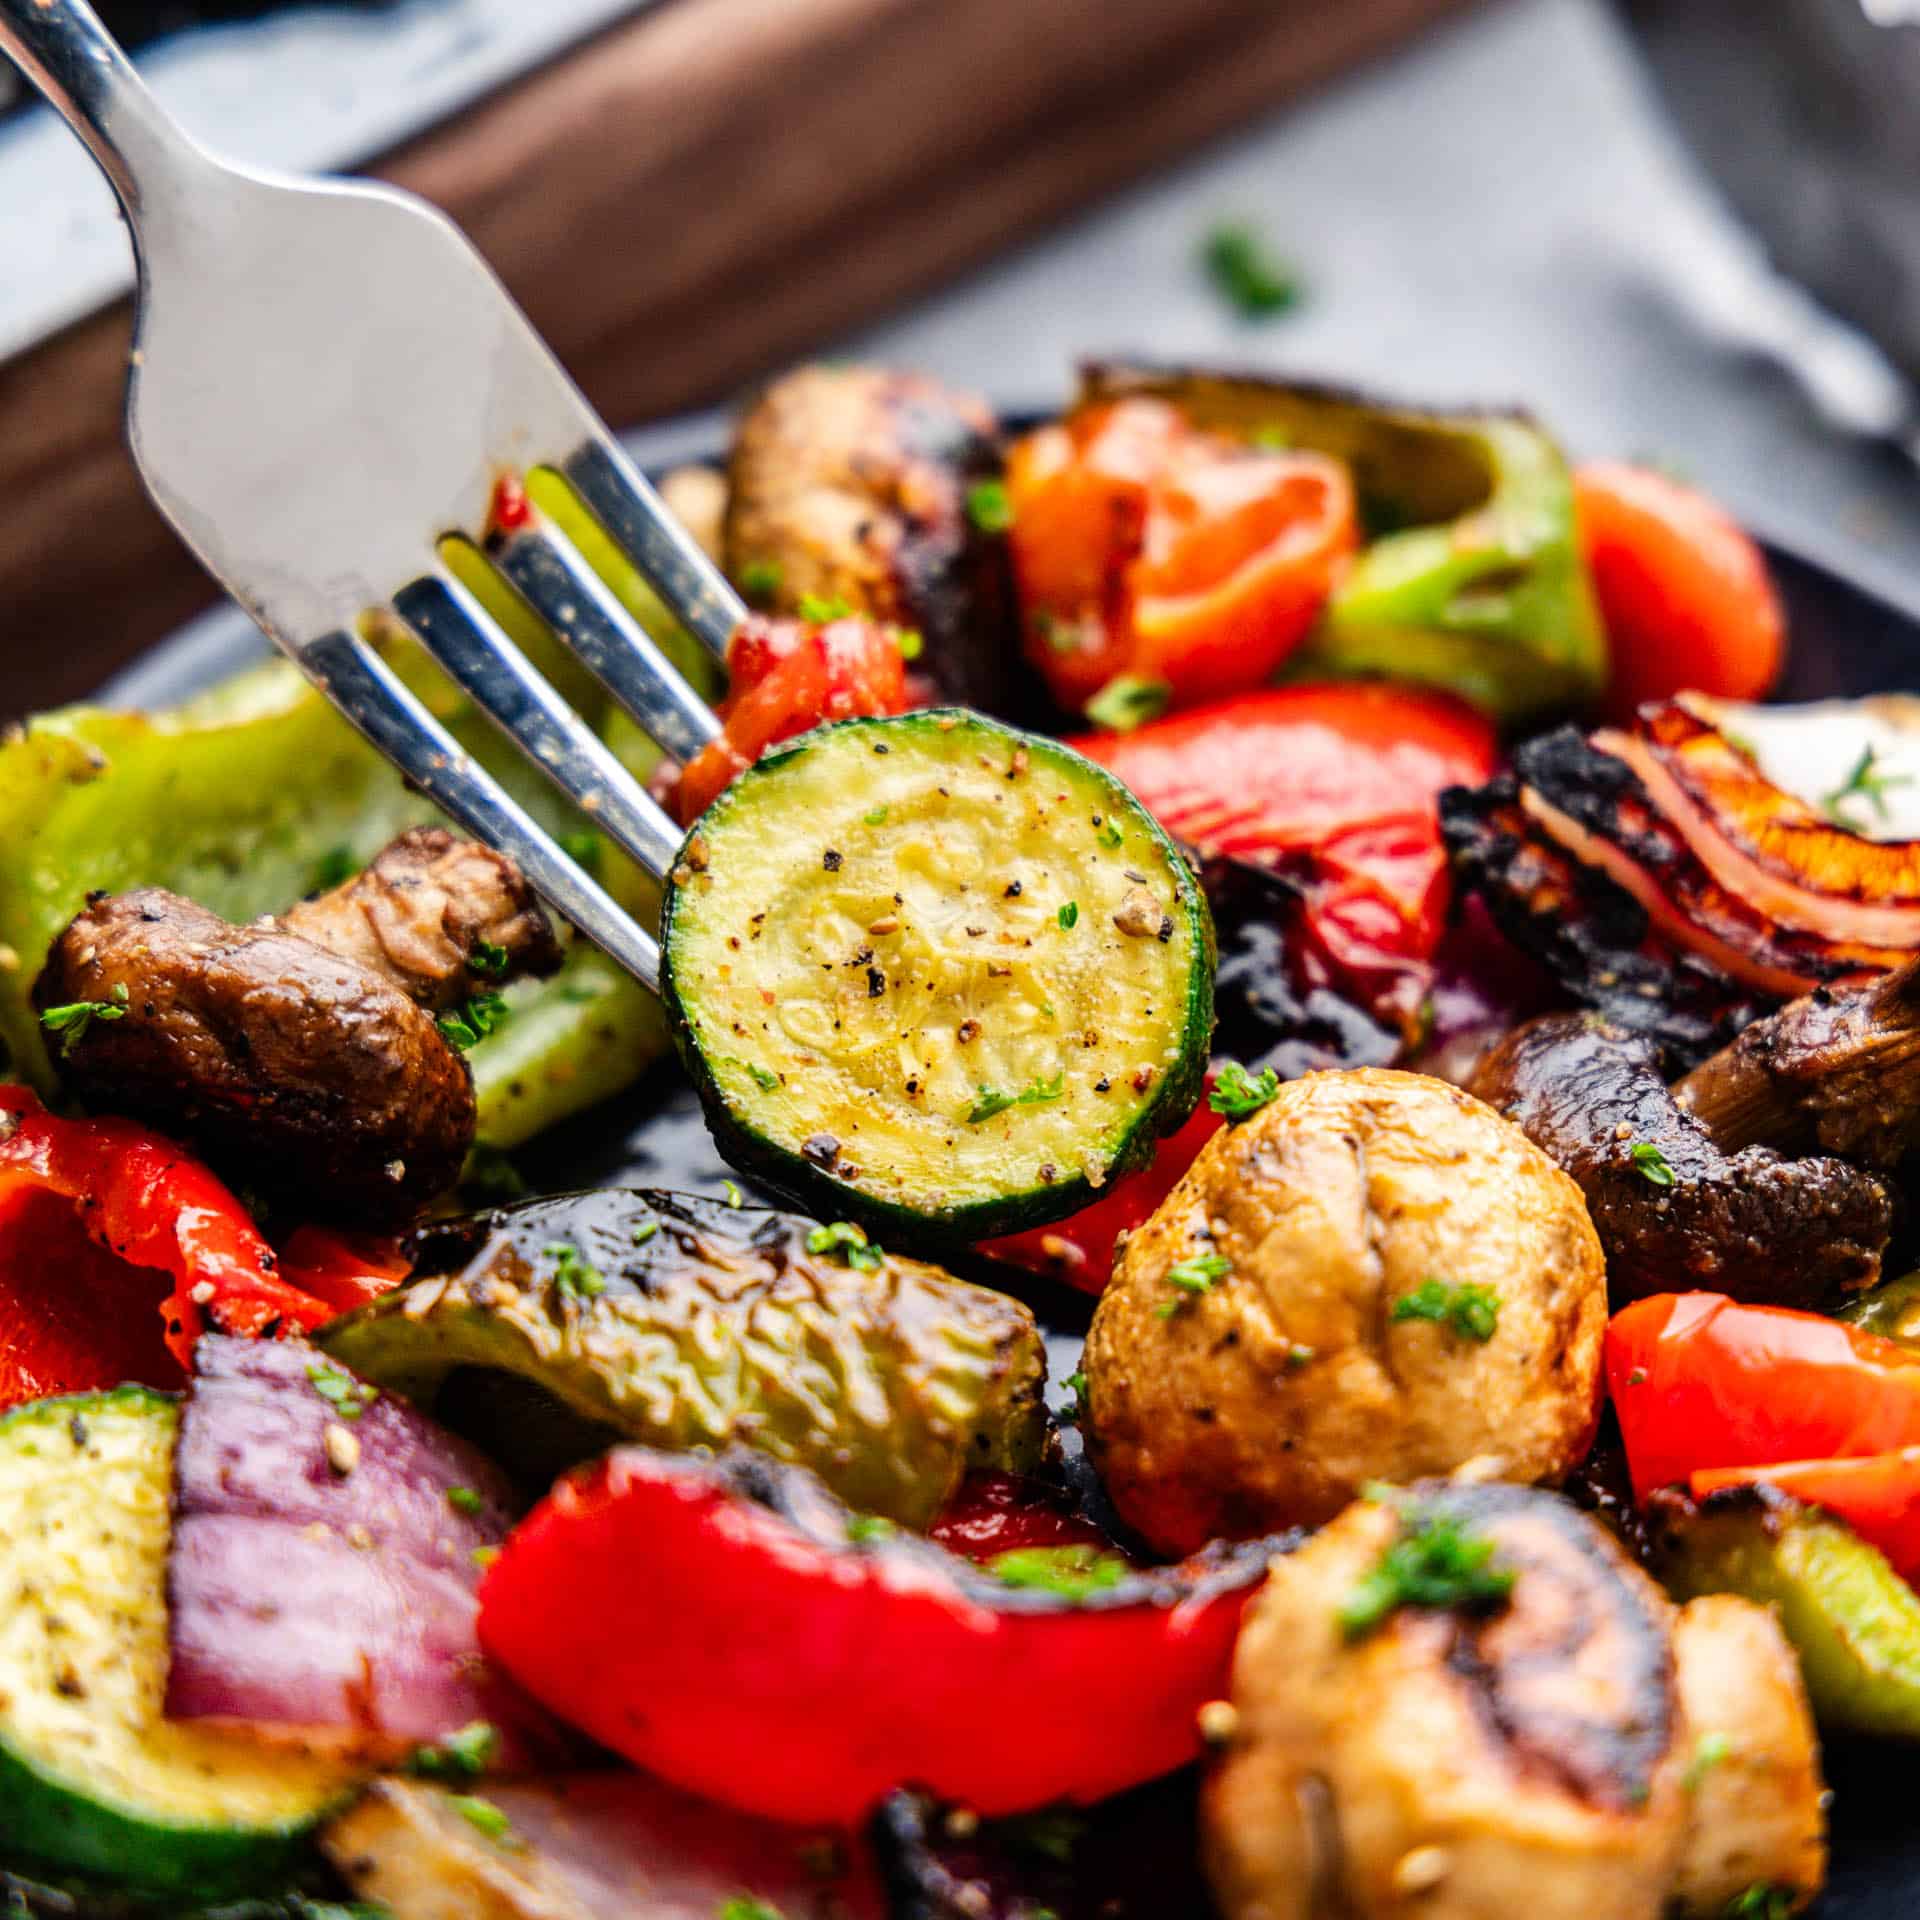 A close up view of a fork lifting out a bite of grilled vegetables from the pan.